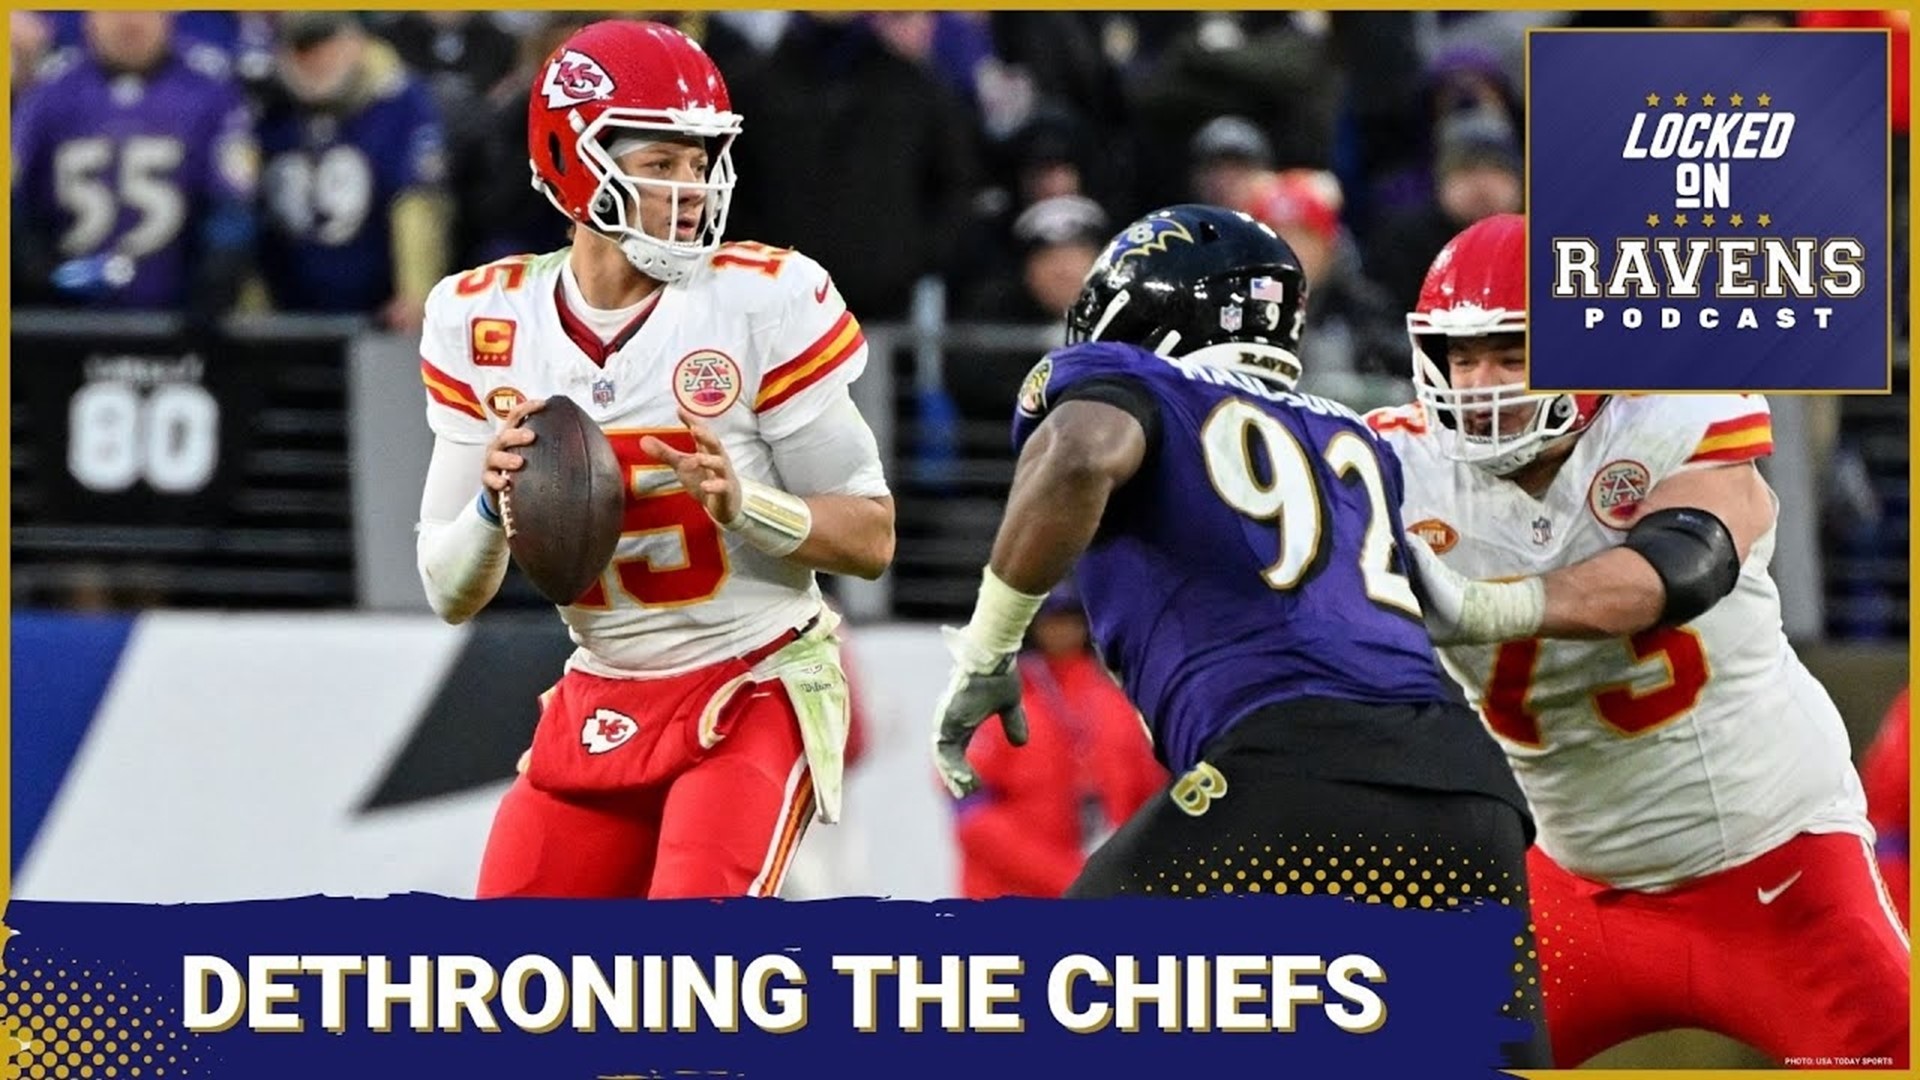 We look at how the Baltimore Ravens can dethrone the Kansas City Chiefs after their Super Bowl win over the San Francisco 49ers.